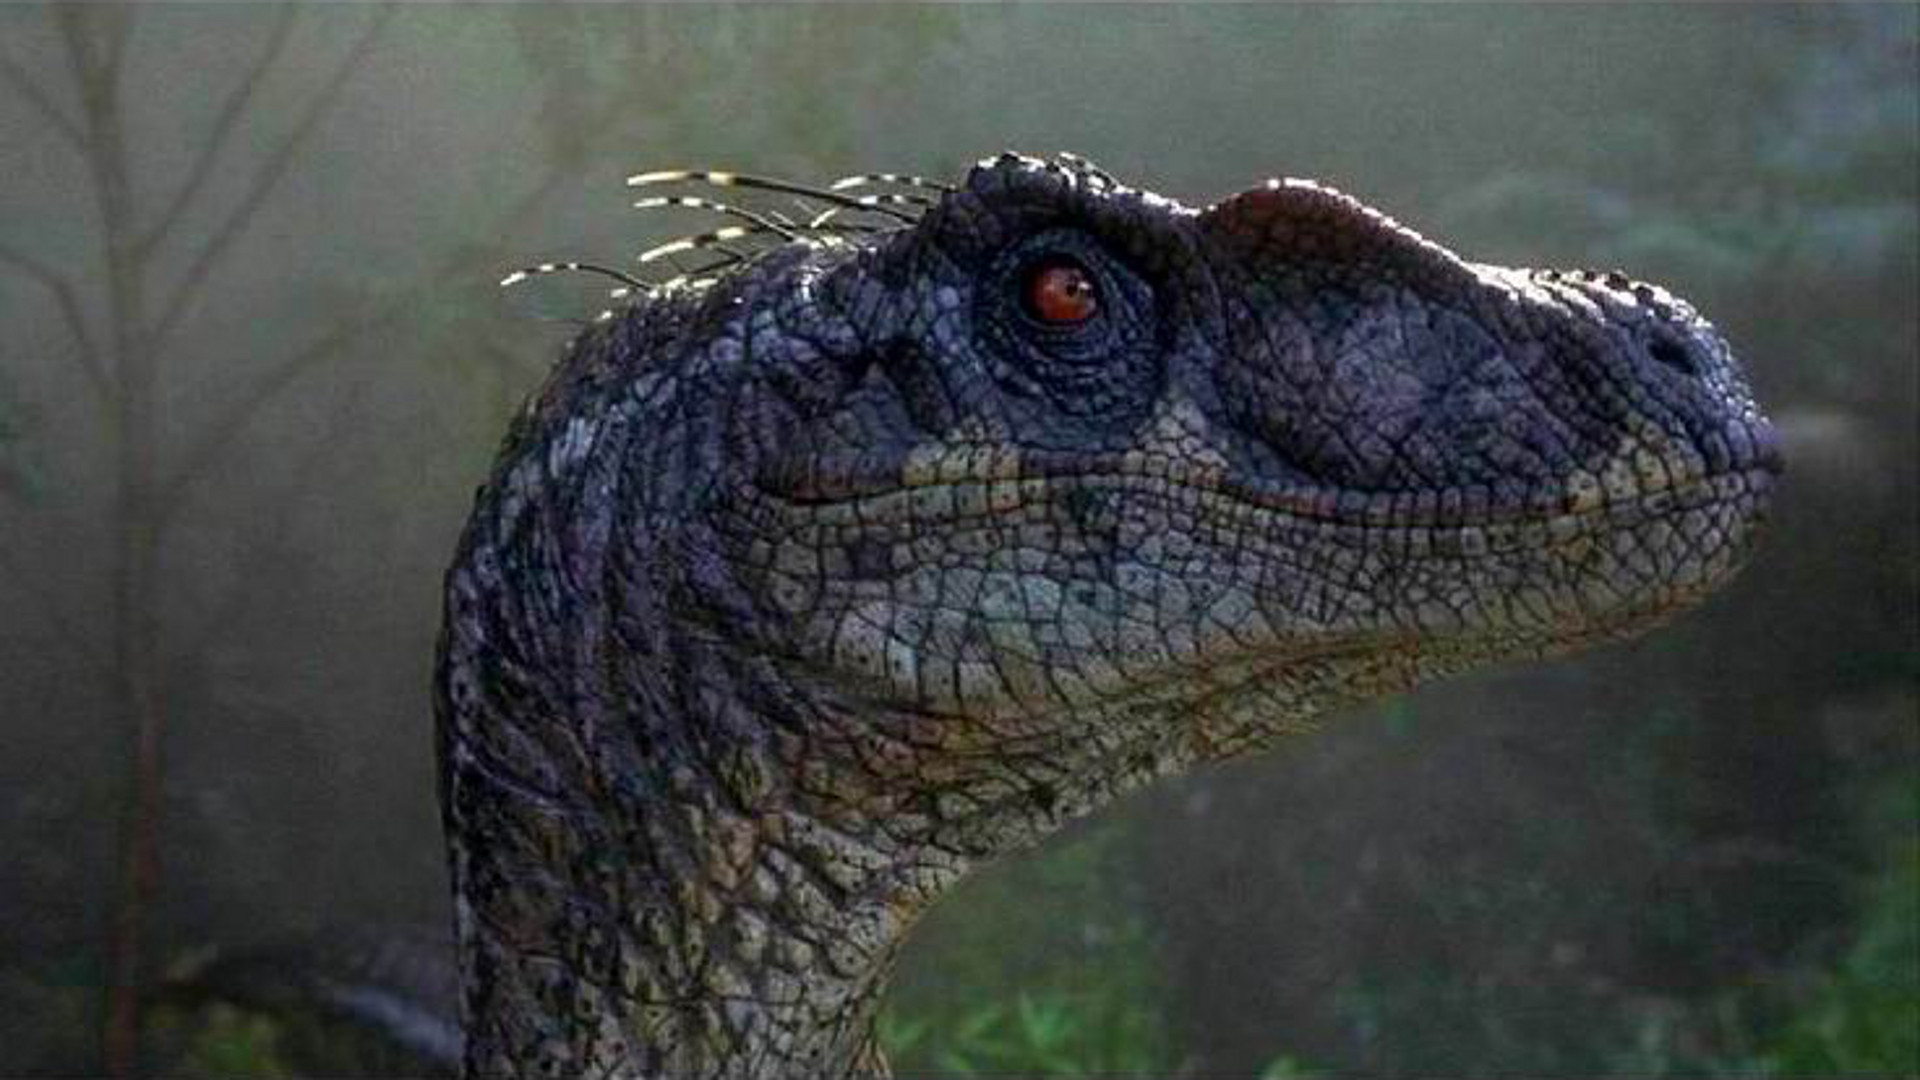 Jurassic Park III brings the original trilogy to an end with a